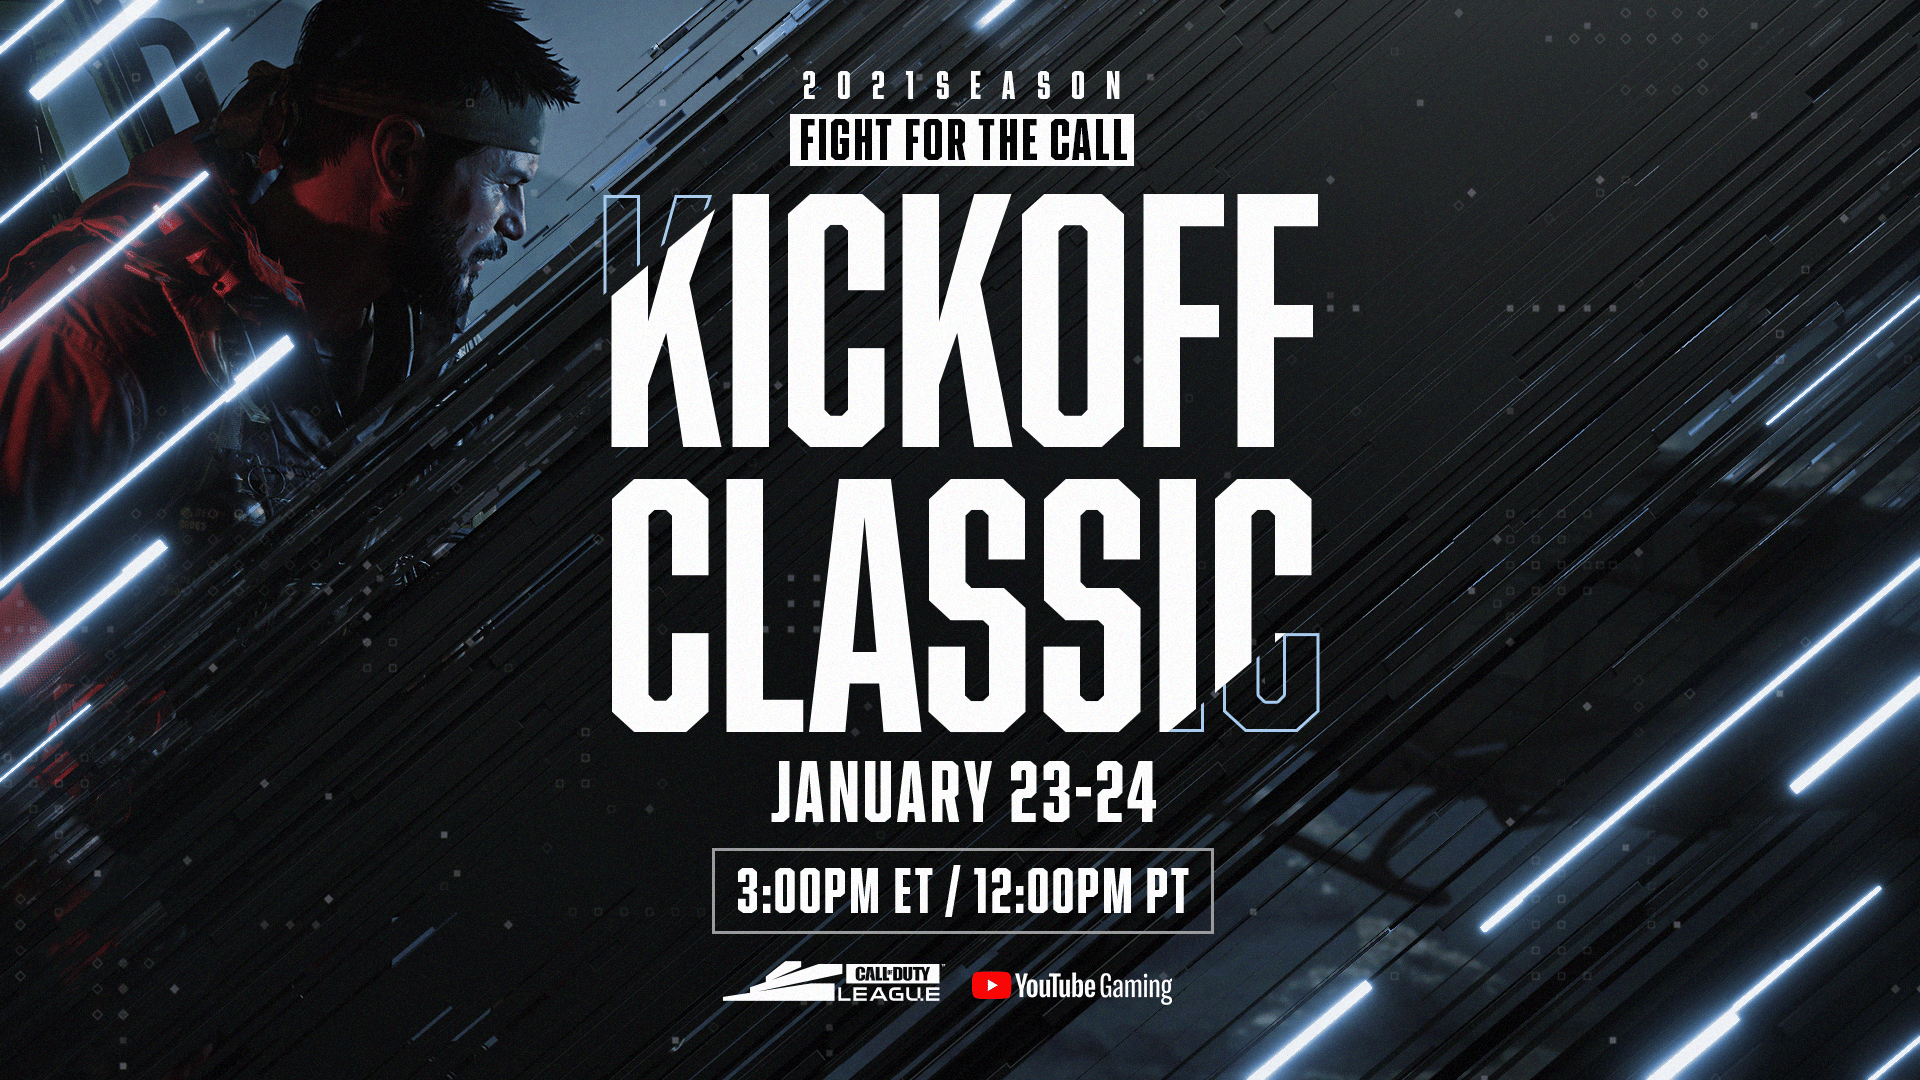 CDL Kickoff Classic promotional image